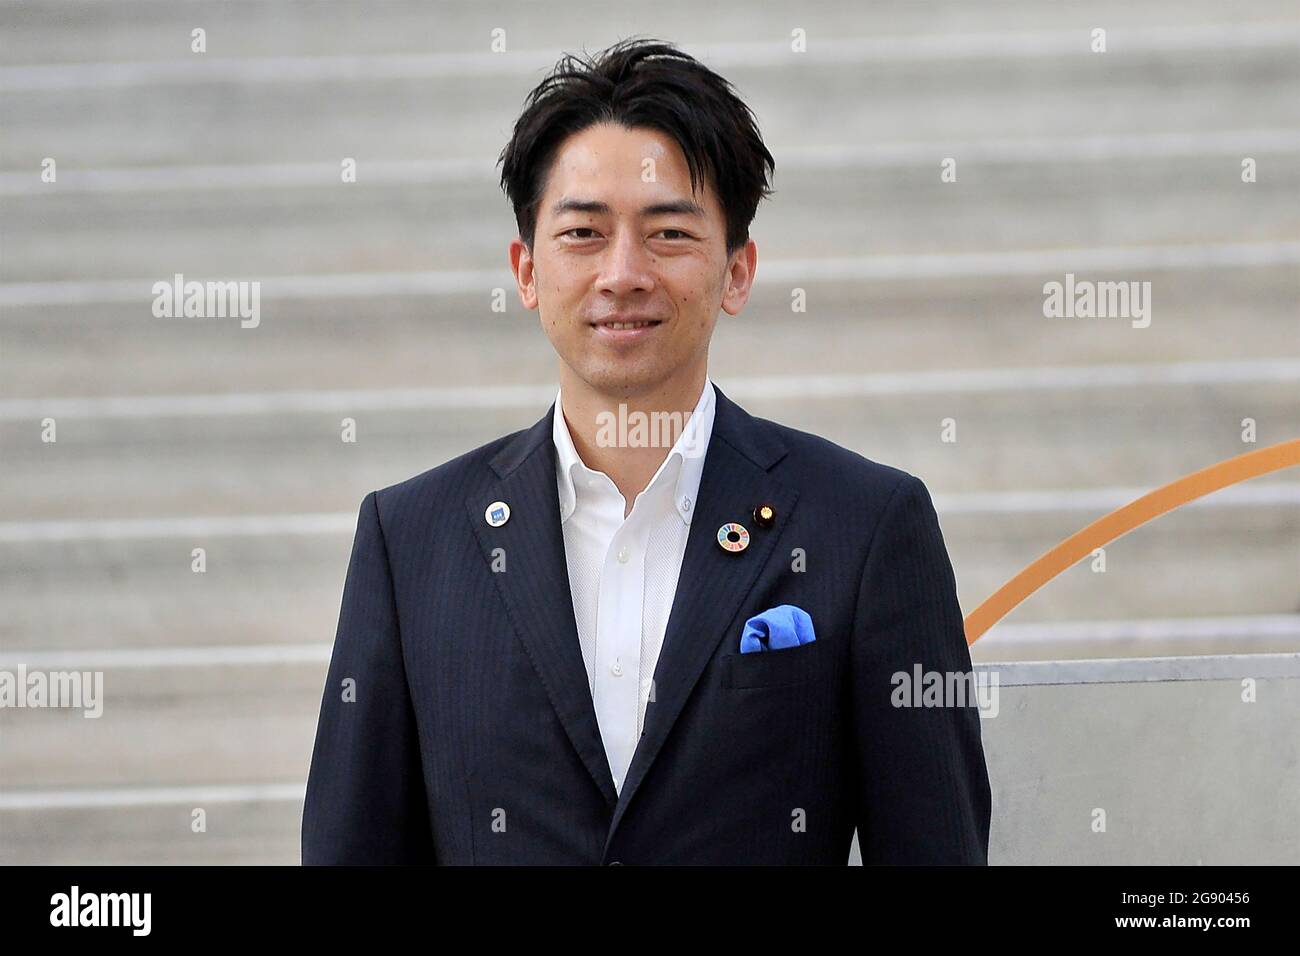 Napoli, Italy. 23rd July, 2021. Shinjiro Koizumi Japanese Minister of the  Environment, during the G20 Italy 2021, which was held in Naples 22-23  July. Naples, Italy, 23 July. (photo by Vincenzo Izzo/Sipa